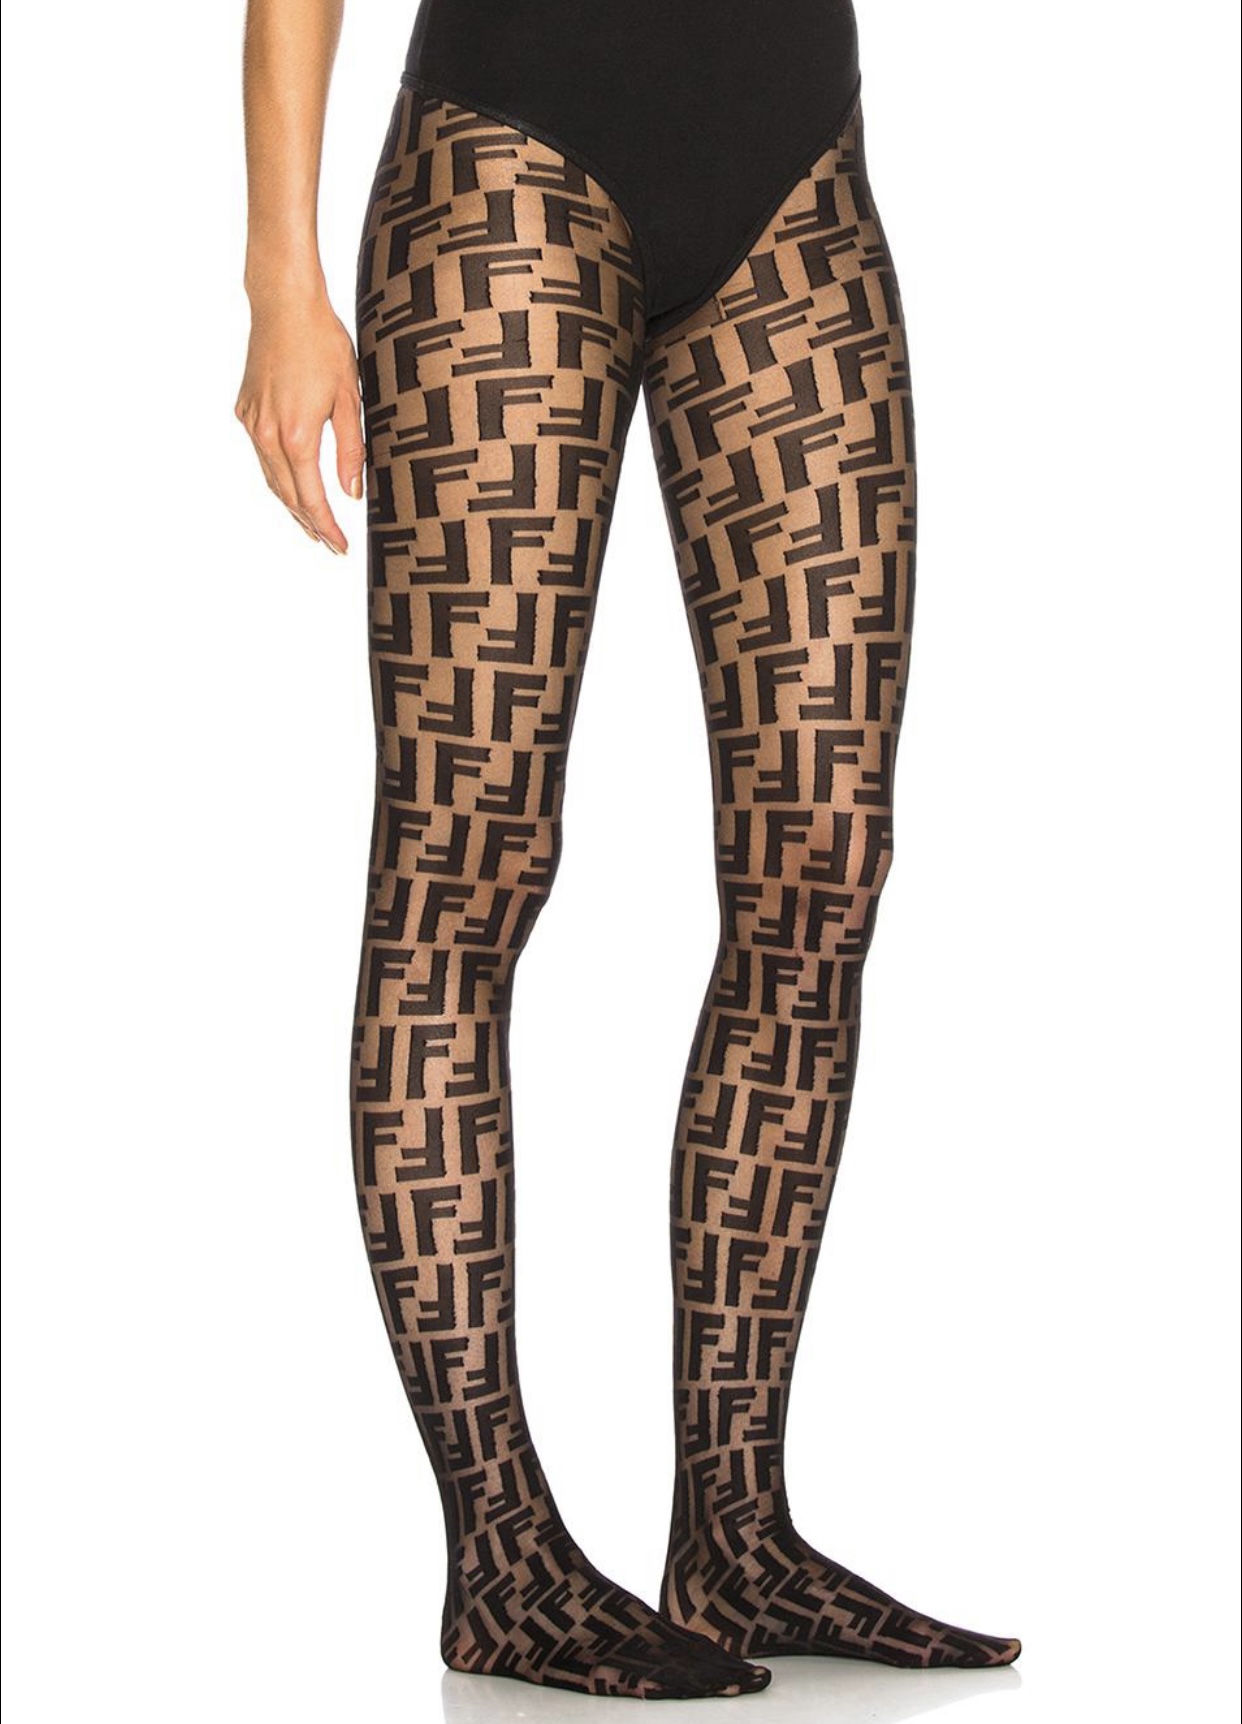 Review Of the Gucci GG Pattern Tights – Angela Baltimore